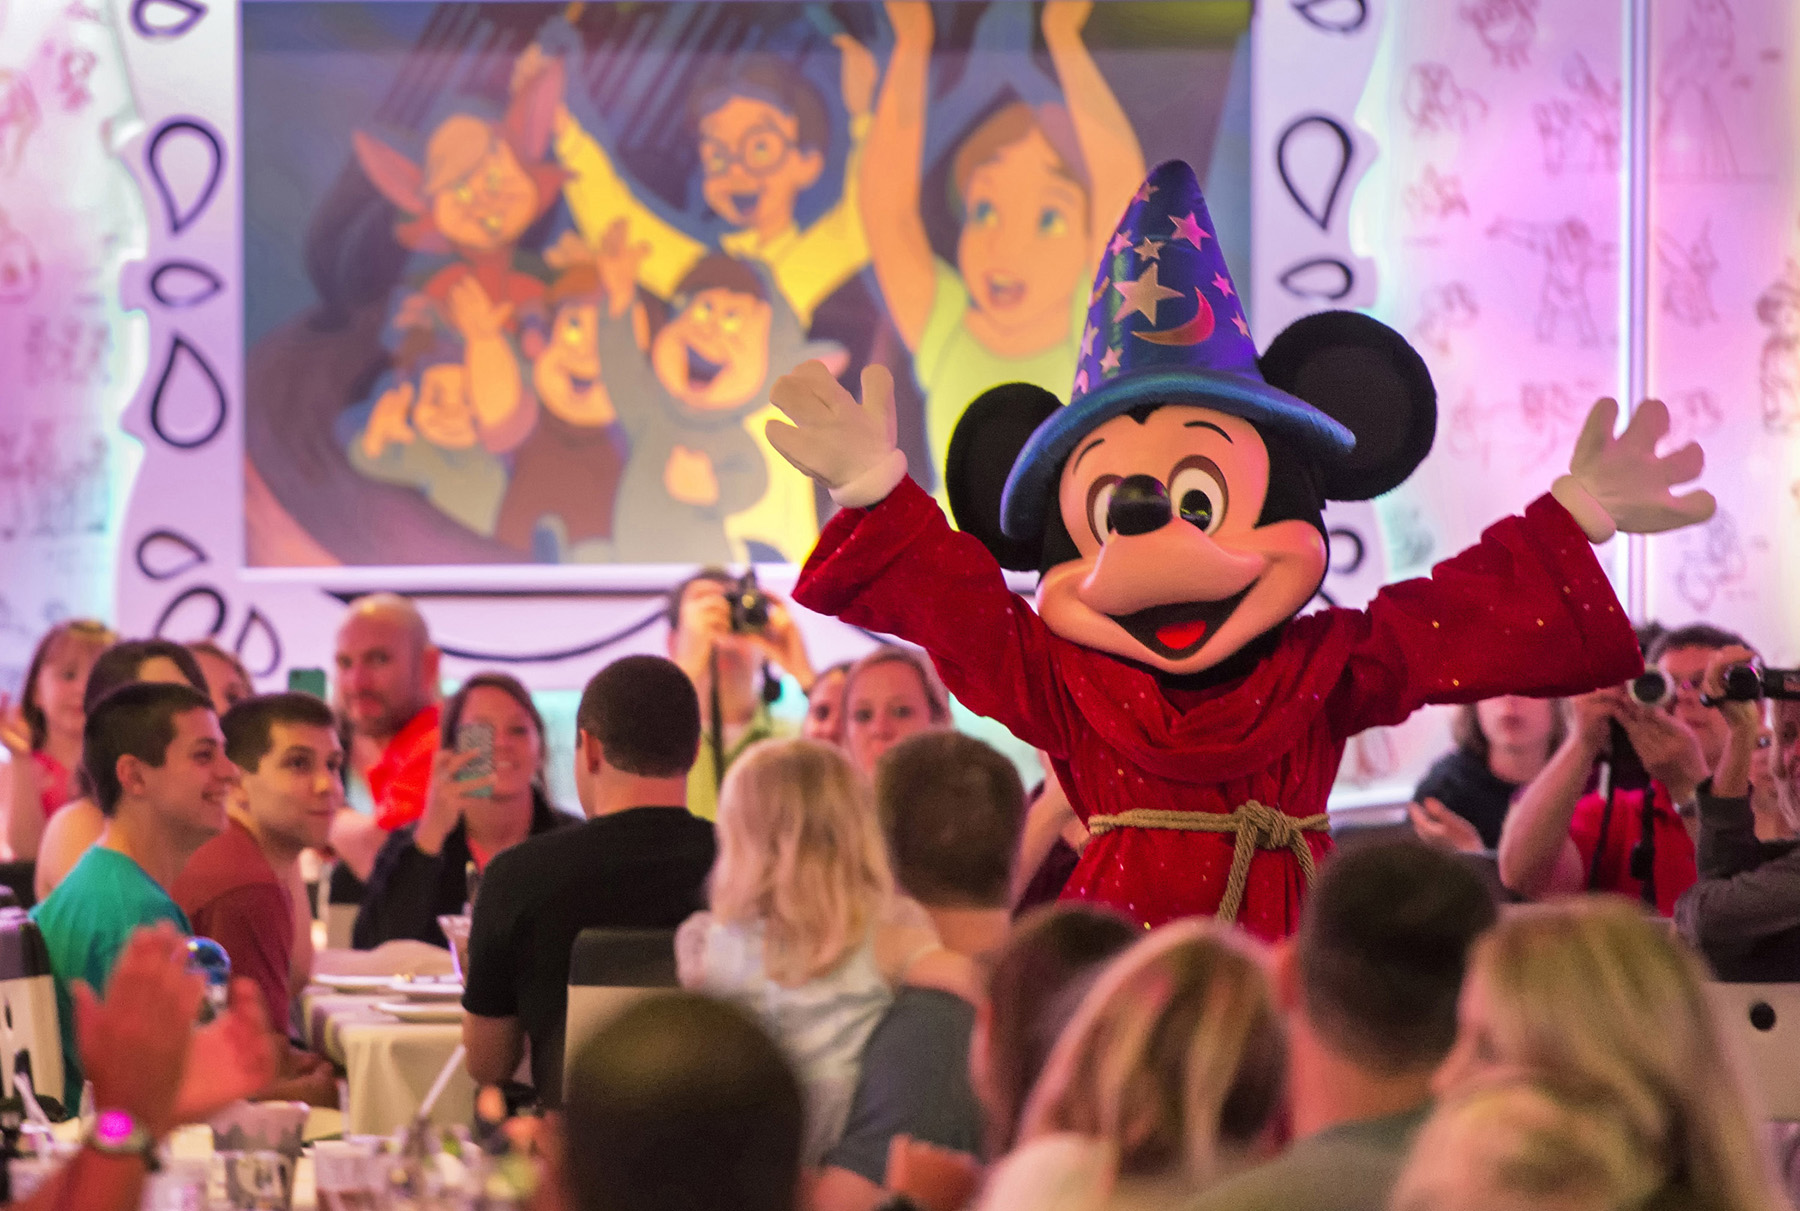 Sorcerer Mickey greets passengers dining at Animator's Palate on a Disney Cruise Line ship (source: Disney Cruise Line)